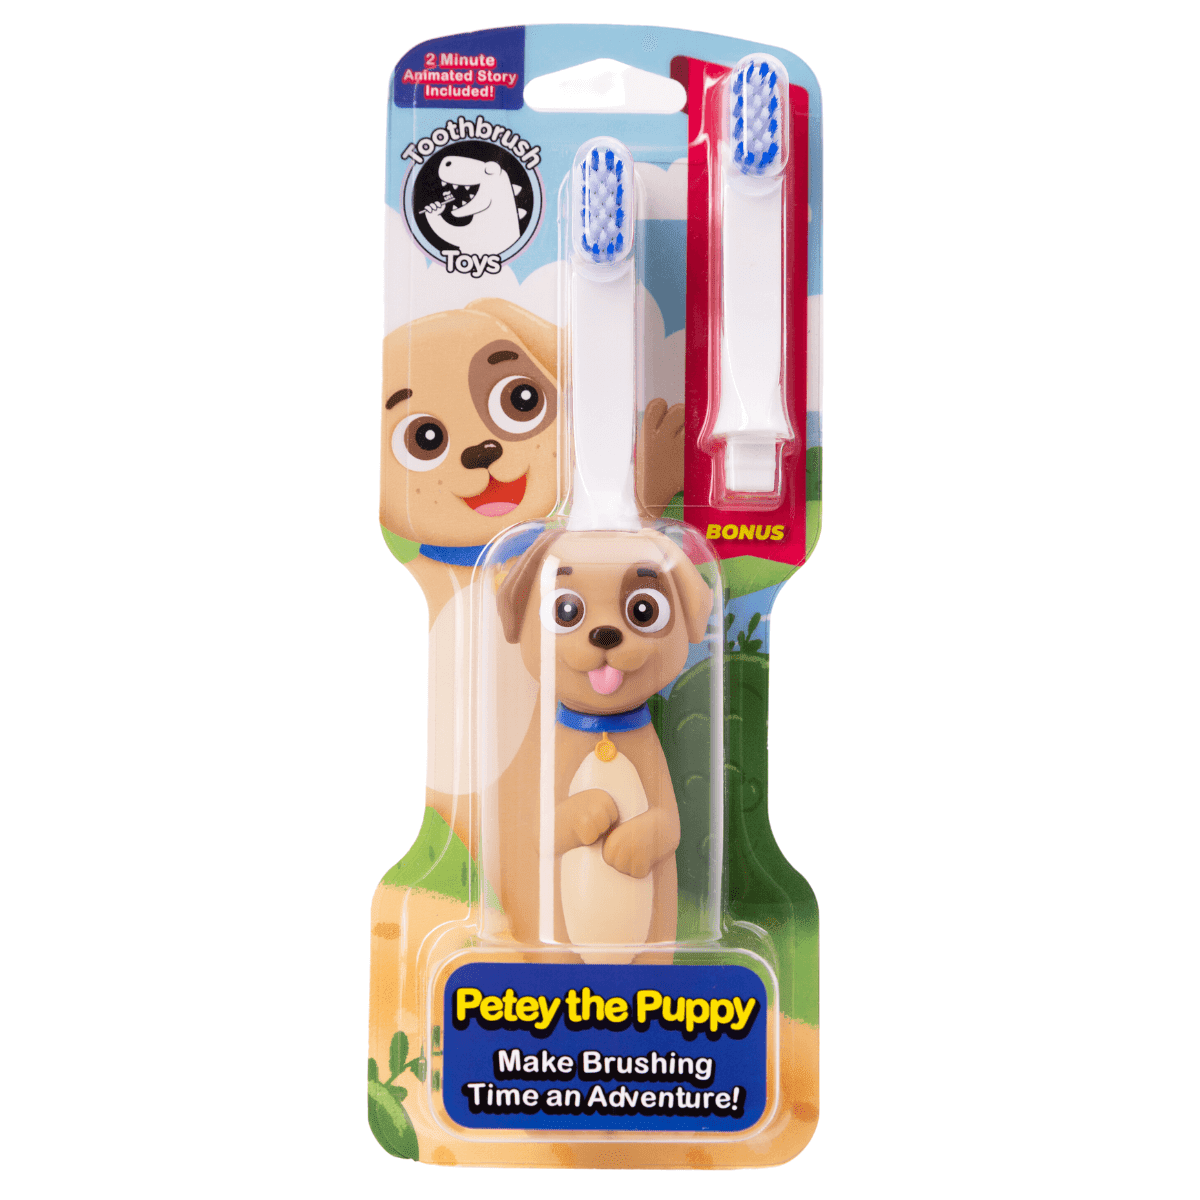 Petey the Puppy themed toothbrush